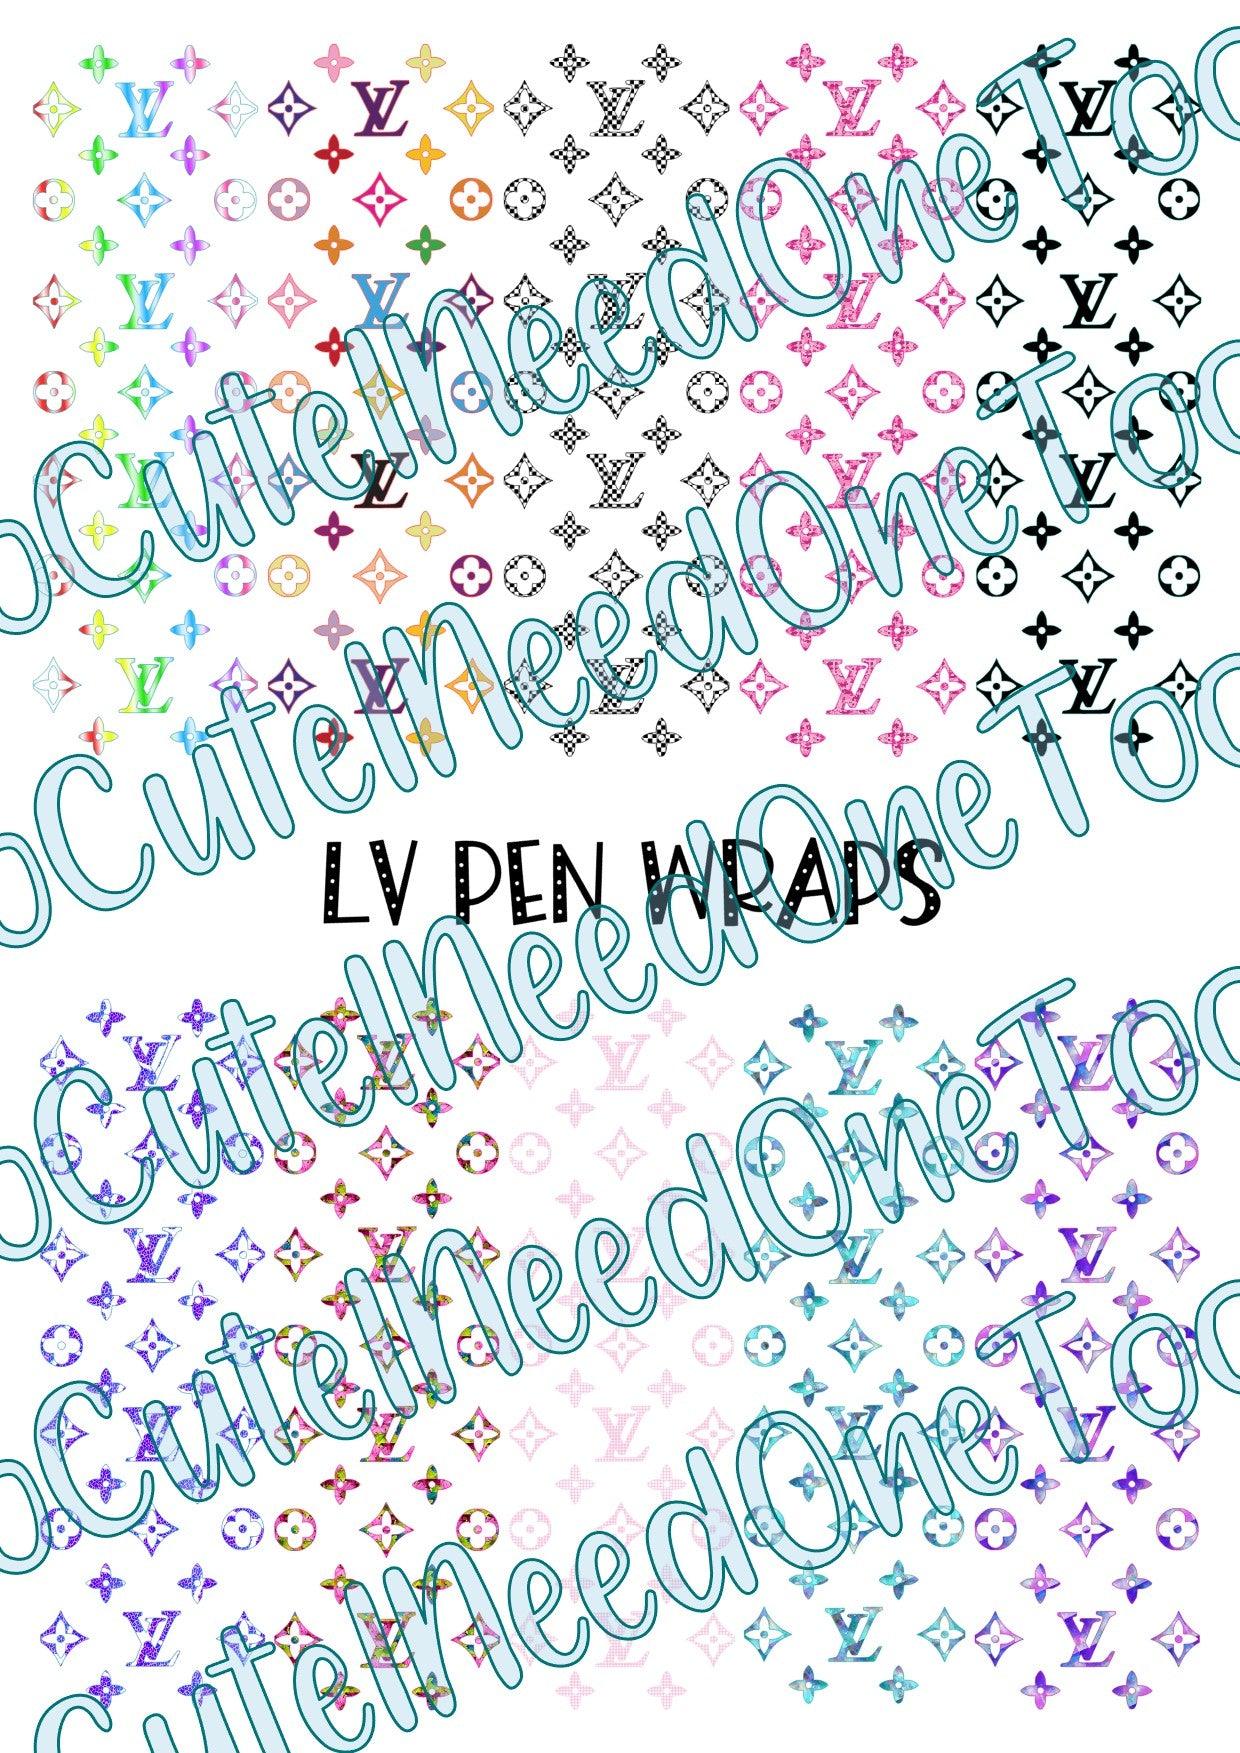 LV (Louis Vuitton) Pen Wraps - Clear/White Waterslide Paper Ready To Use –  SoCuteINeedOneToo